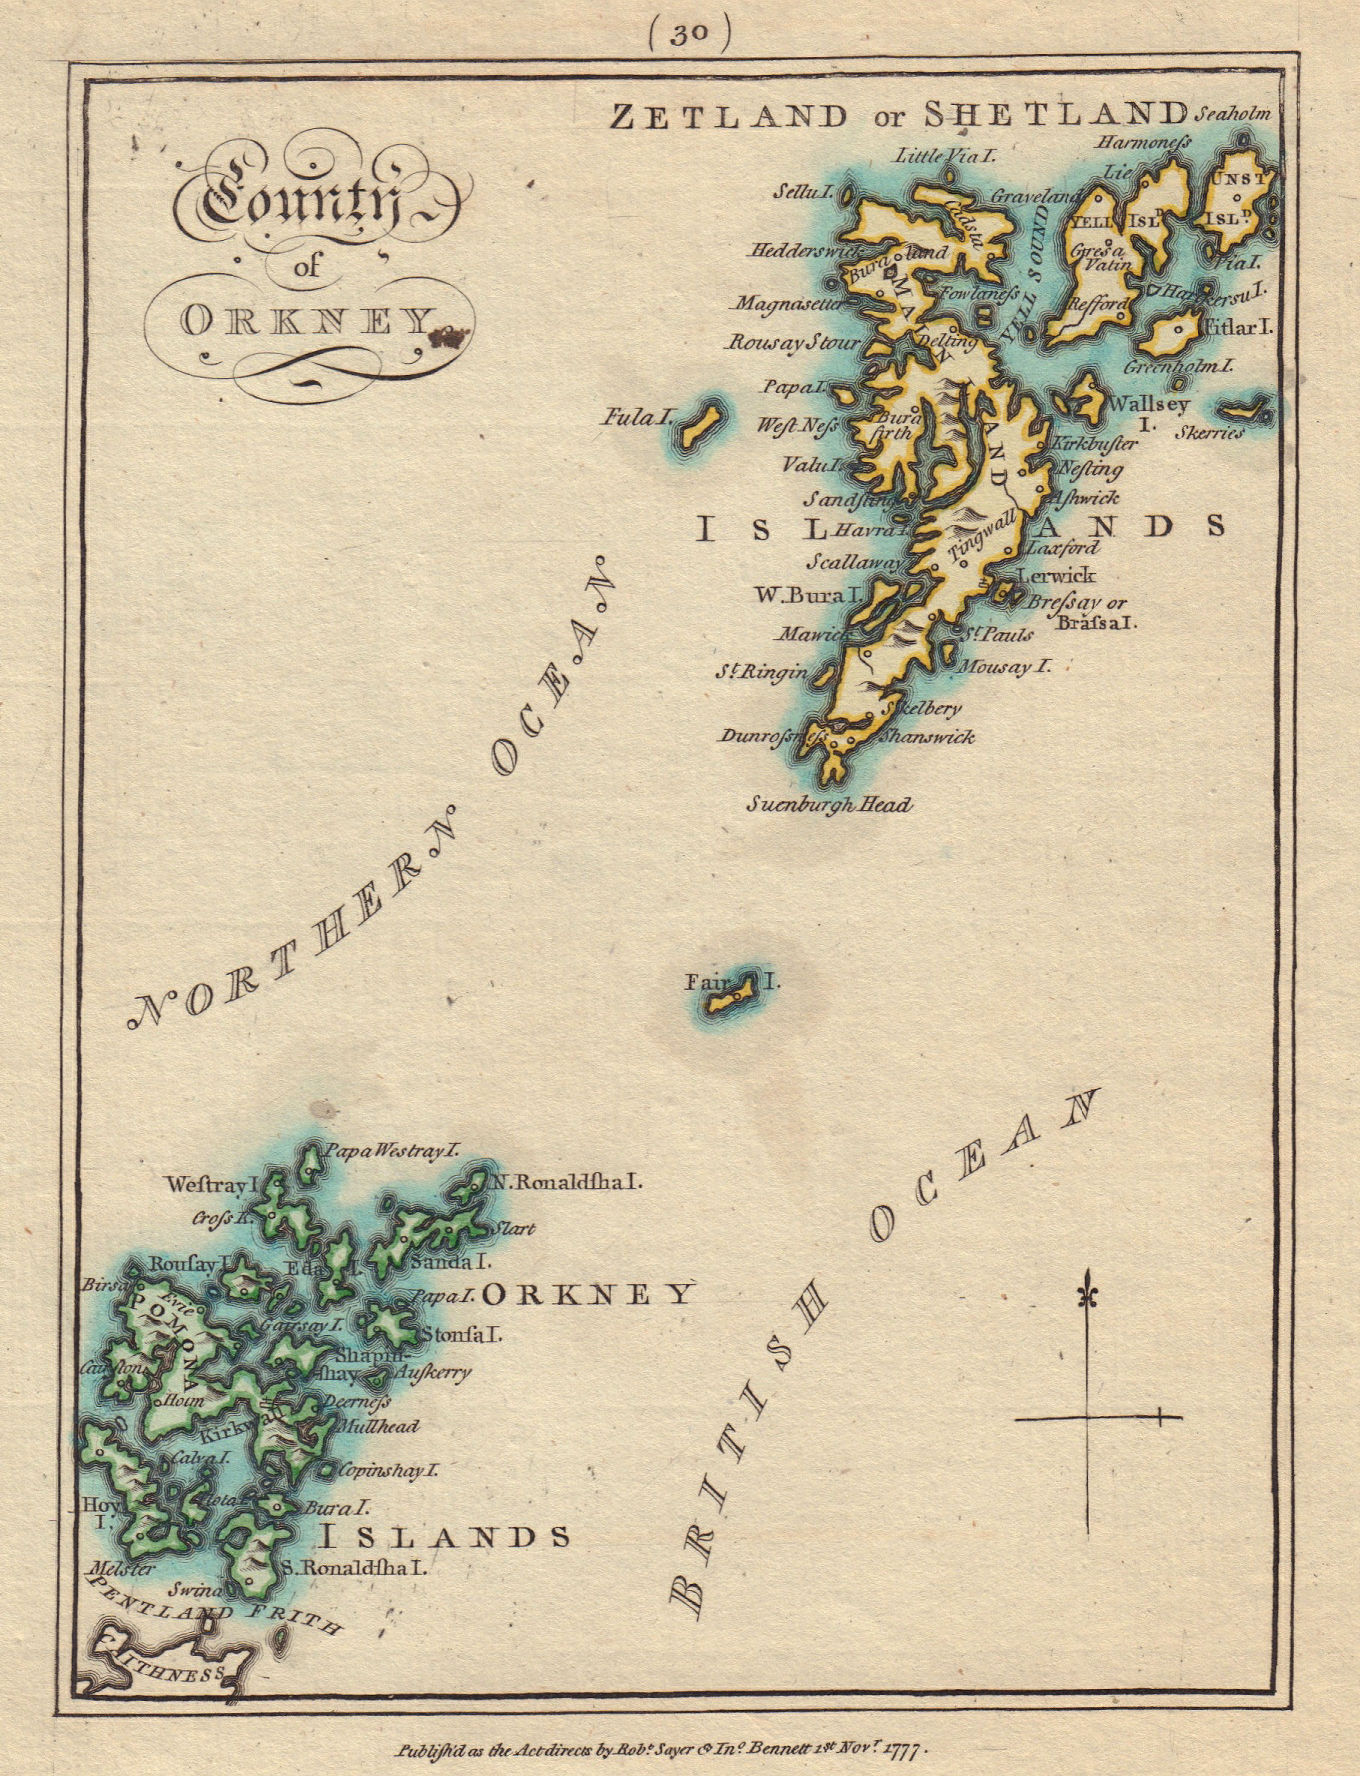 County of Orkney. Orkney & Shetland. SAYER / ARMSTRONG 1794 old antique map